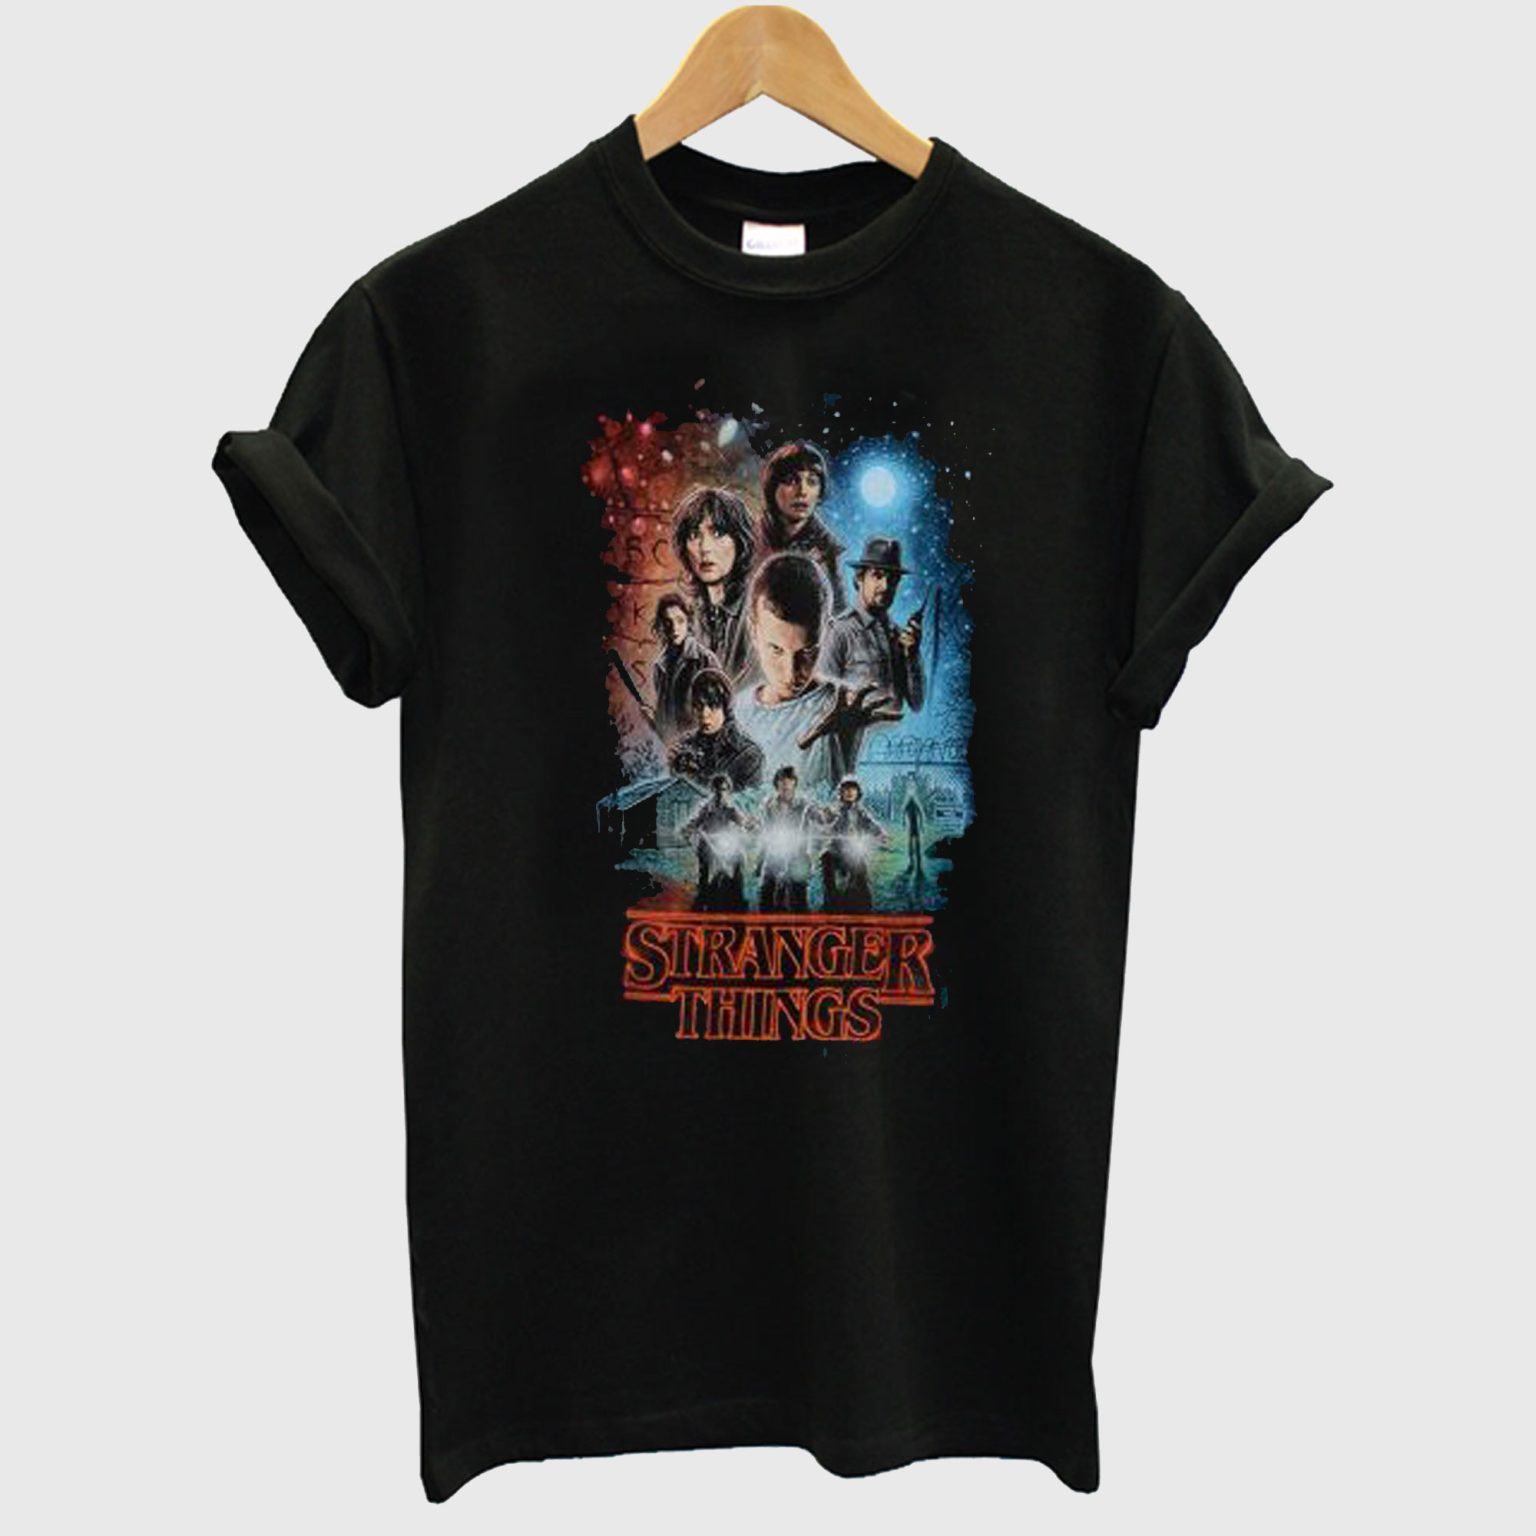 Millie Bobby Brown Stranger Things Autographed Group Shot Graphic T shirt